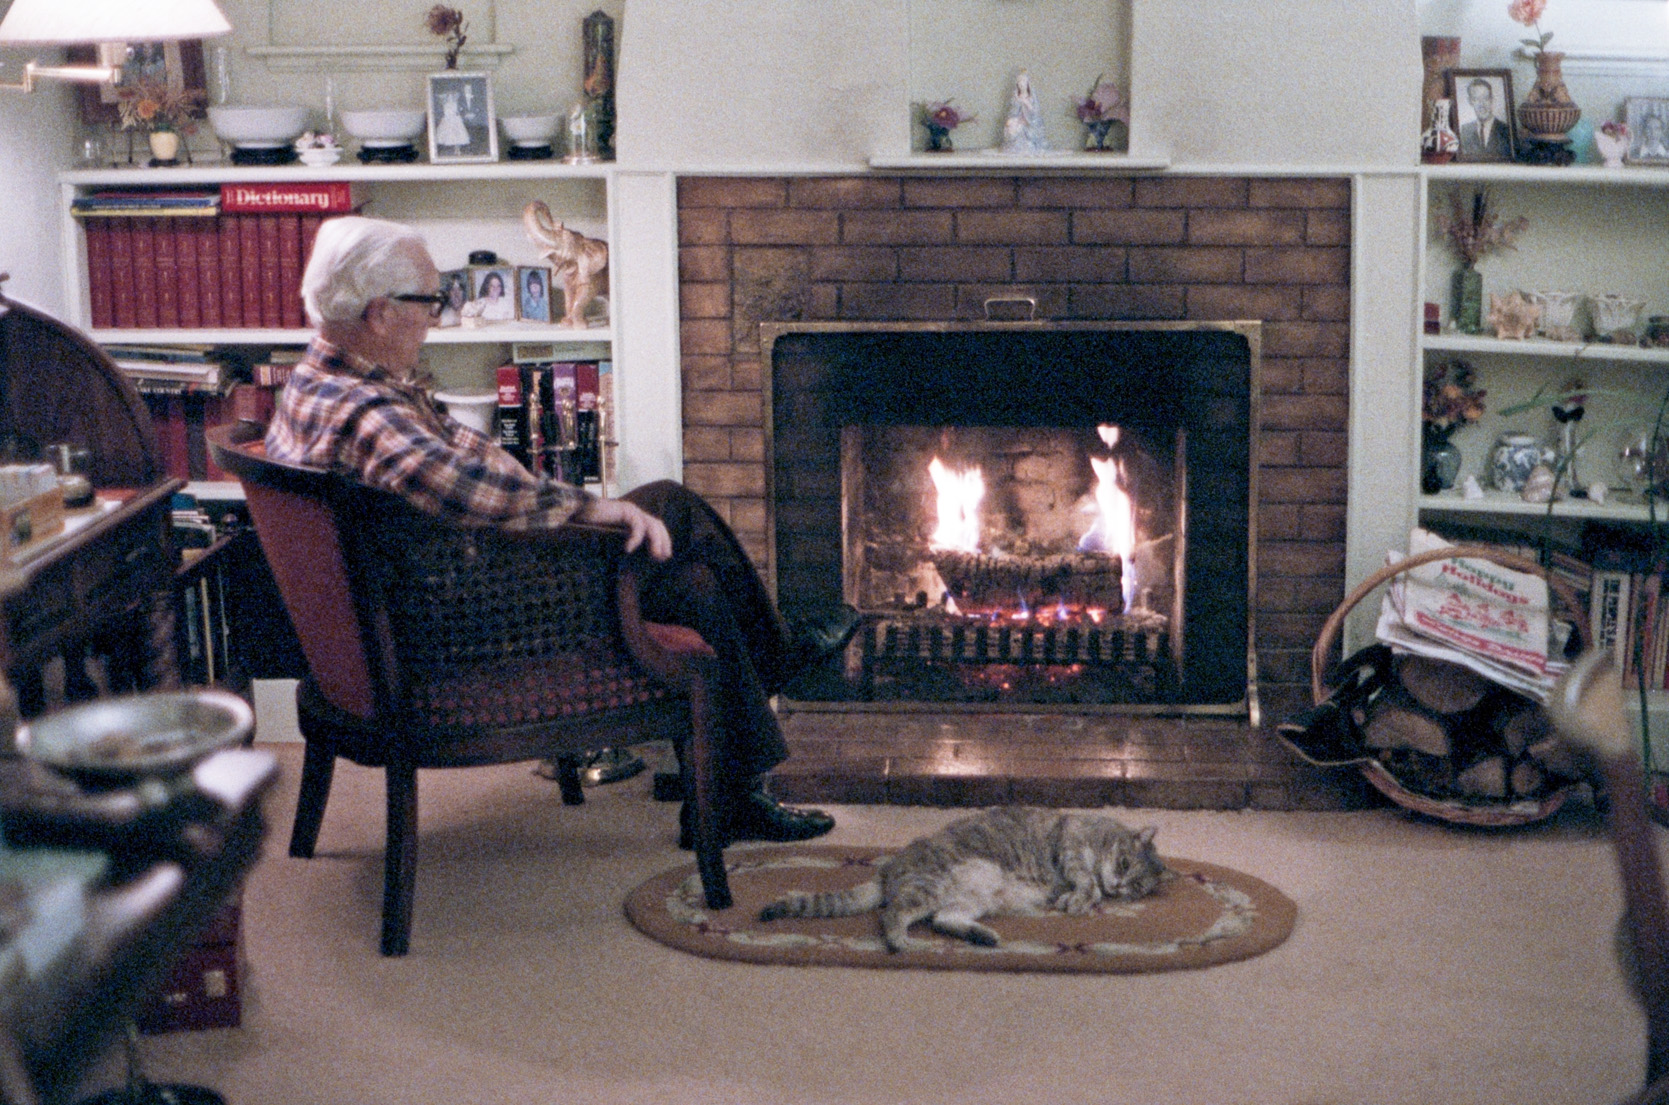 December 24, 1984. My father's last Christmas Eve, twenty-five years ago this week. View full size.